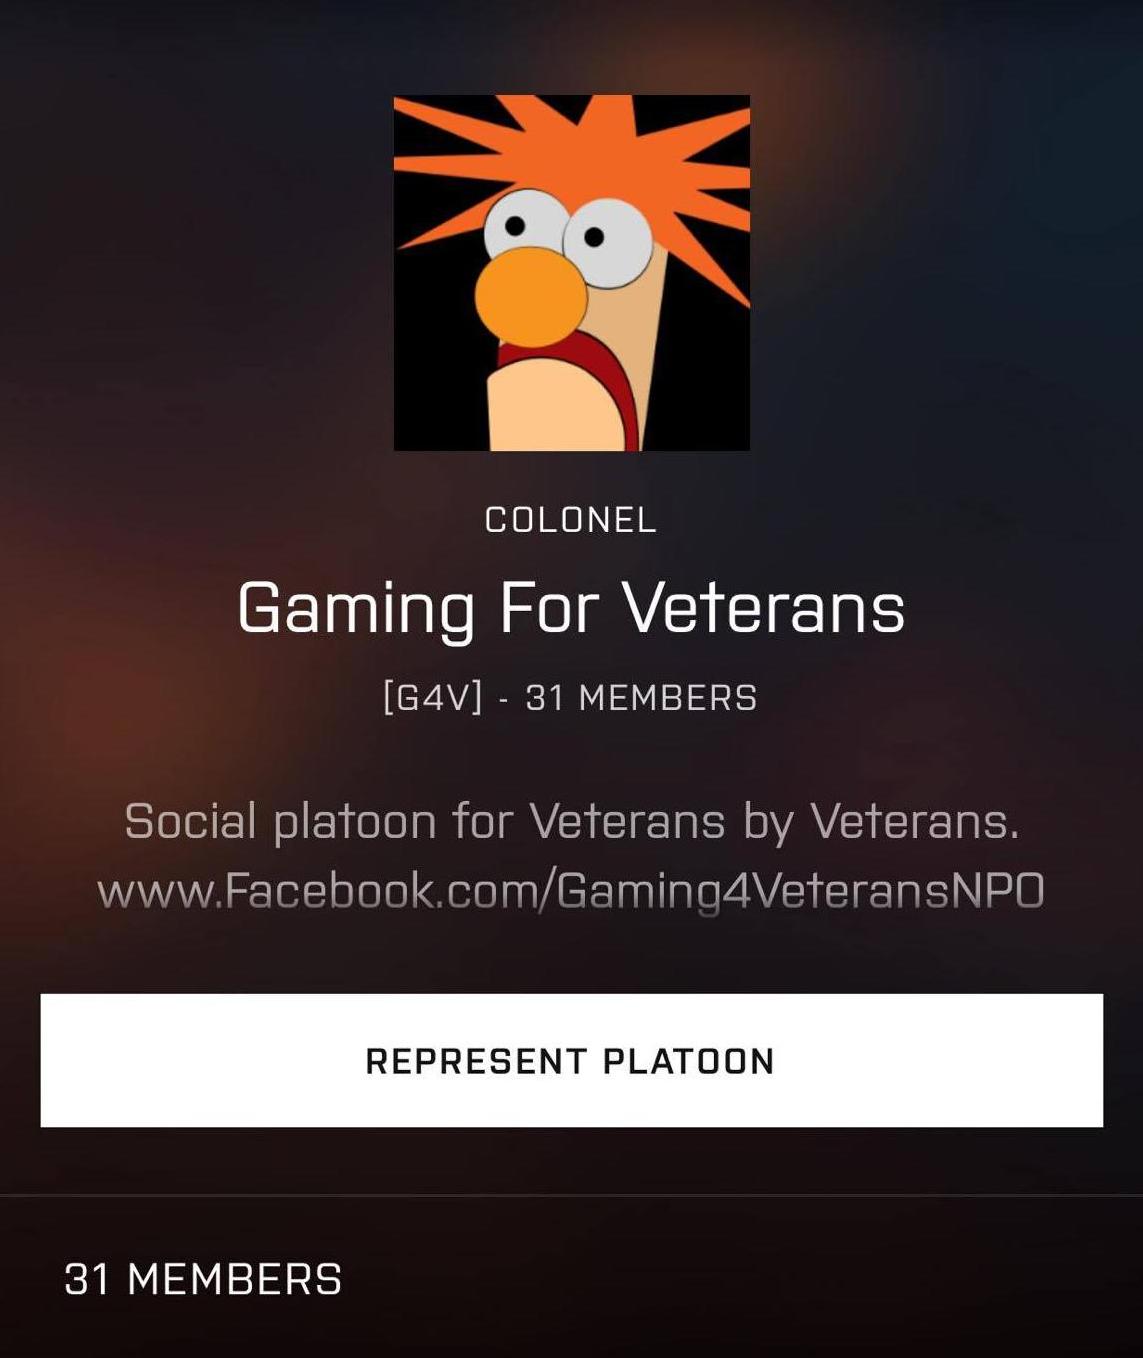 There is even a group devoted to veterans who want to share their stories, fight stress or just play together. So, if this is what you were looking for, or know someone like that this is the group. Have a nice gaming session.